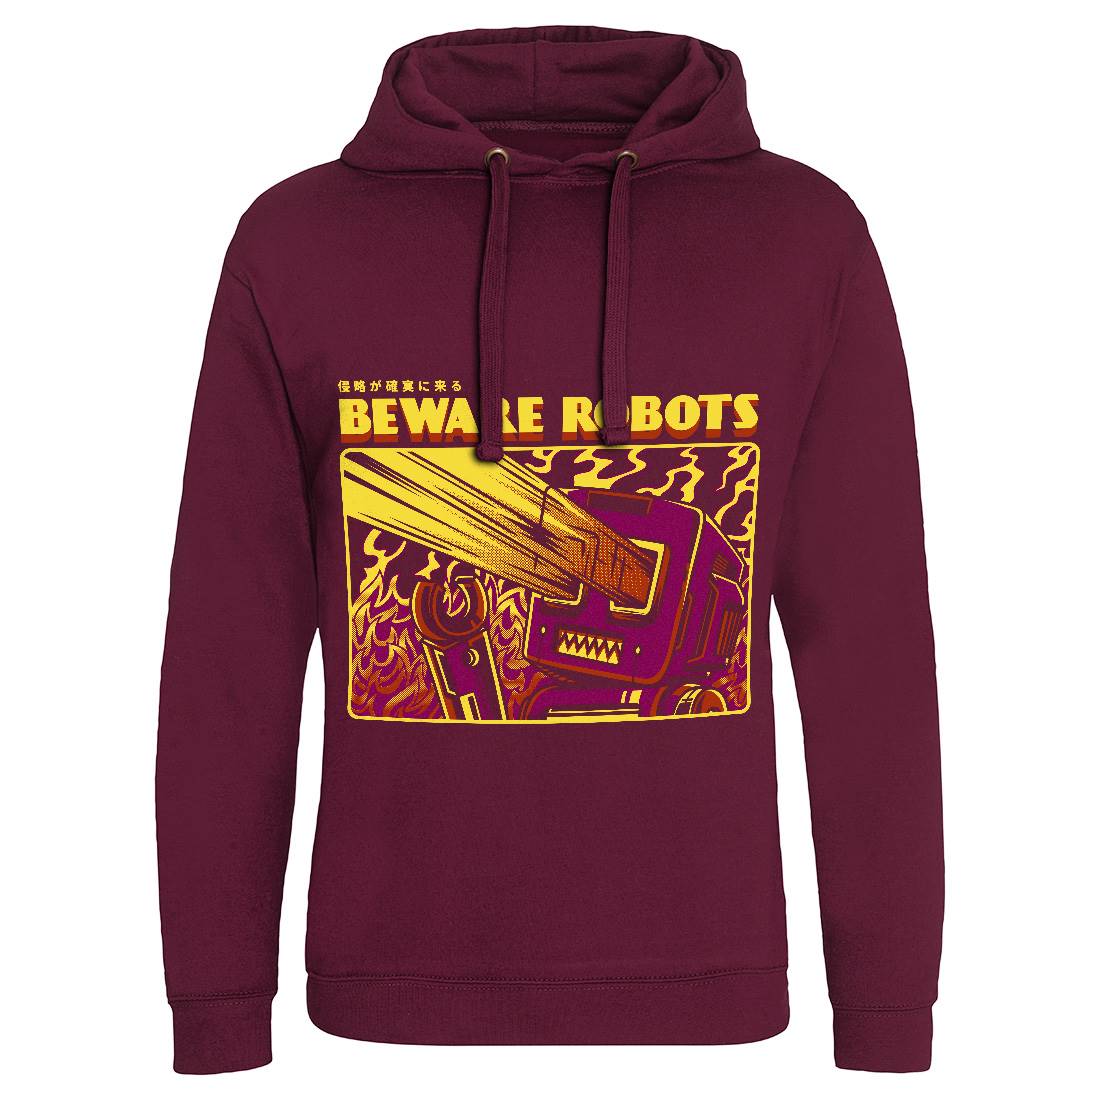 Beware Robots Mens Hoodie Without Pocket Space D714